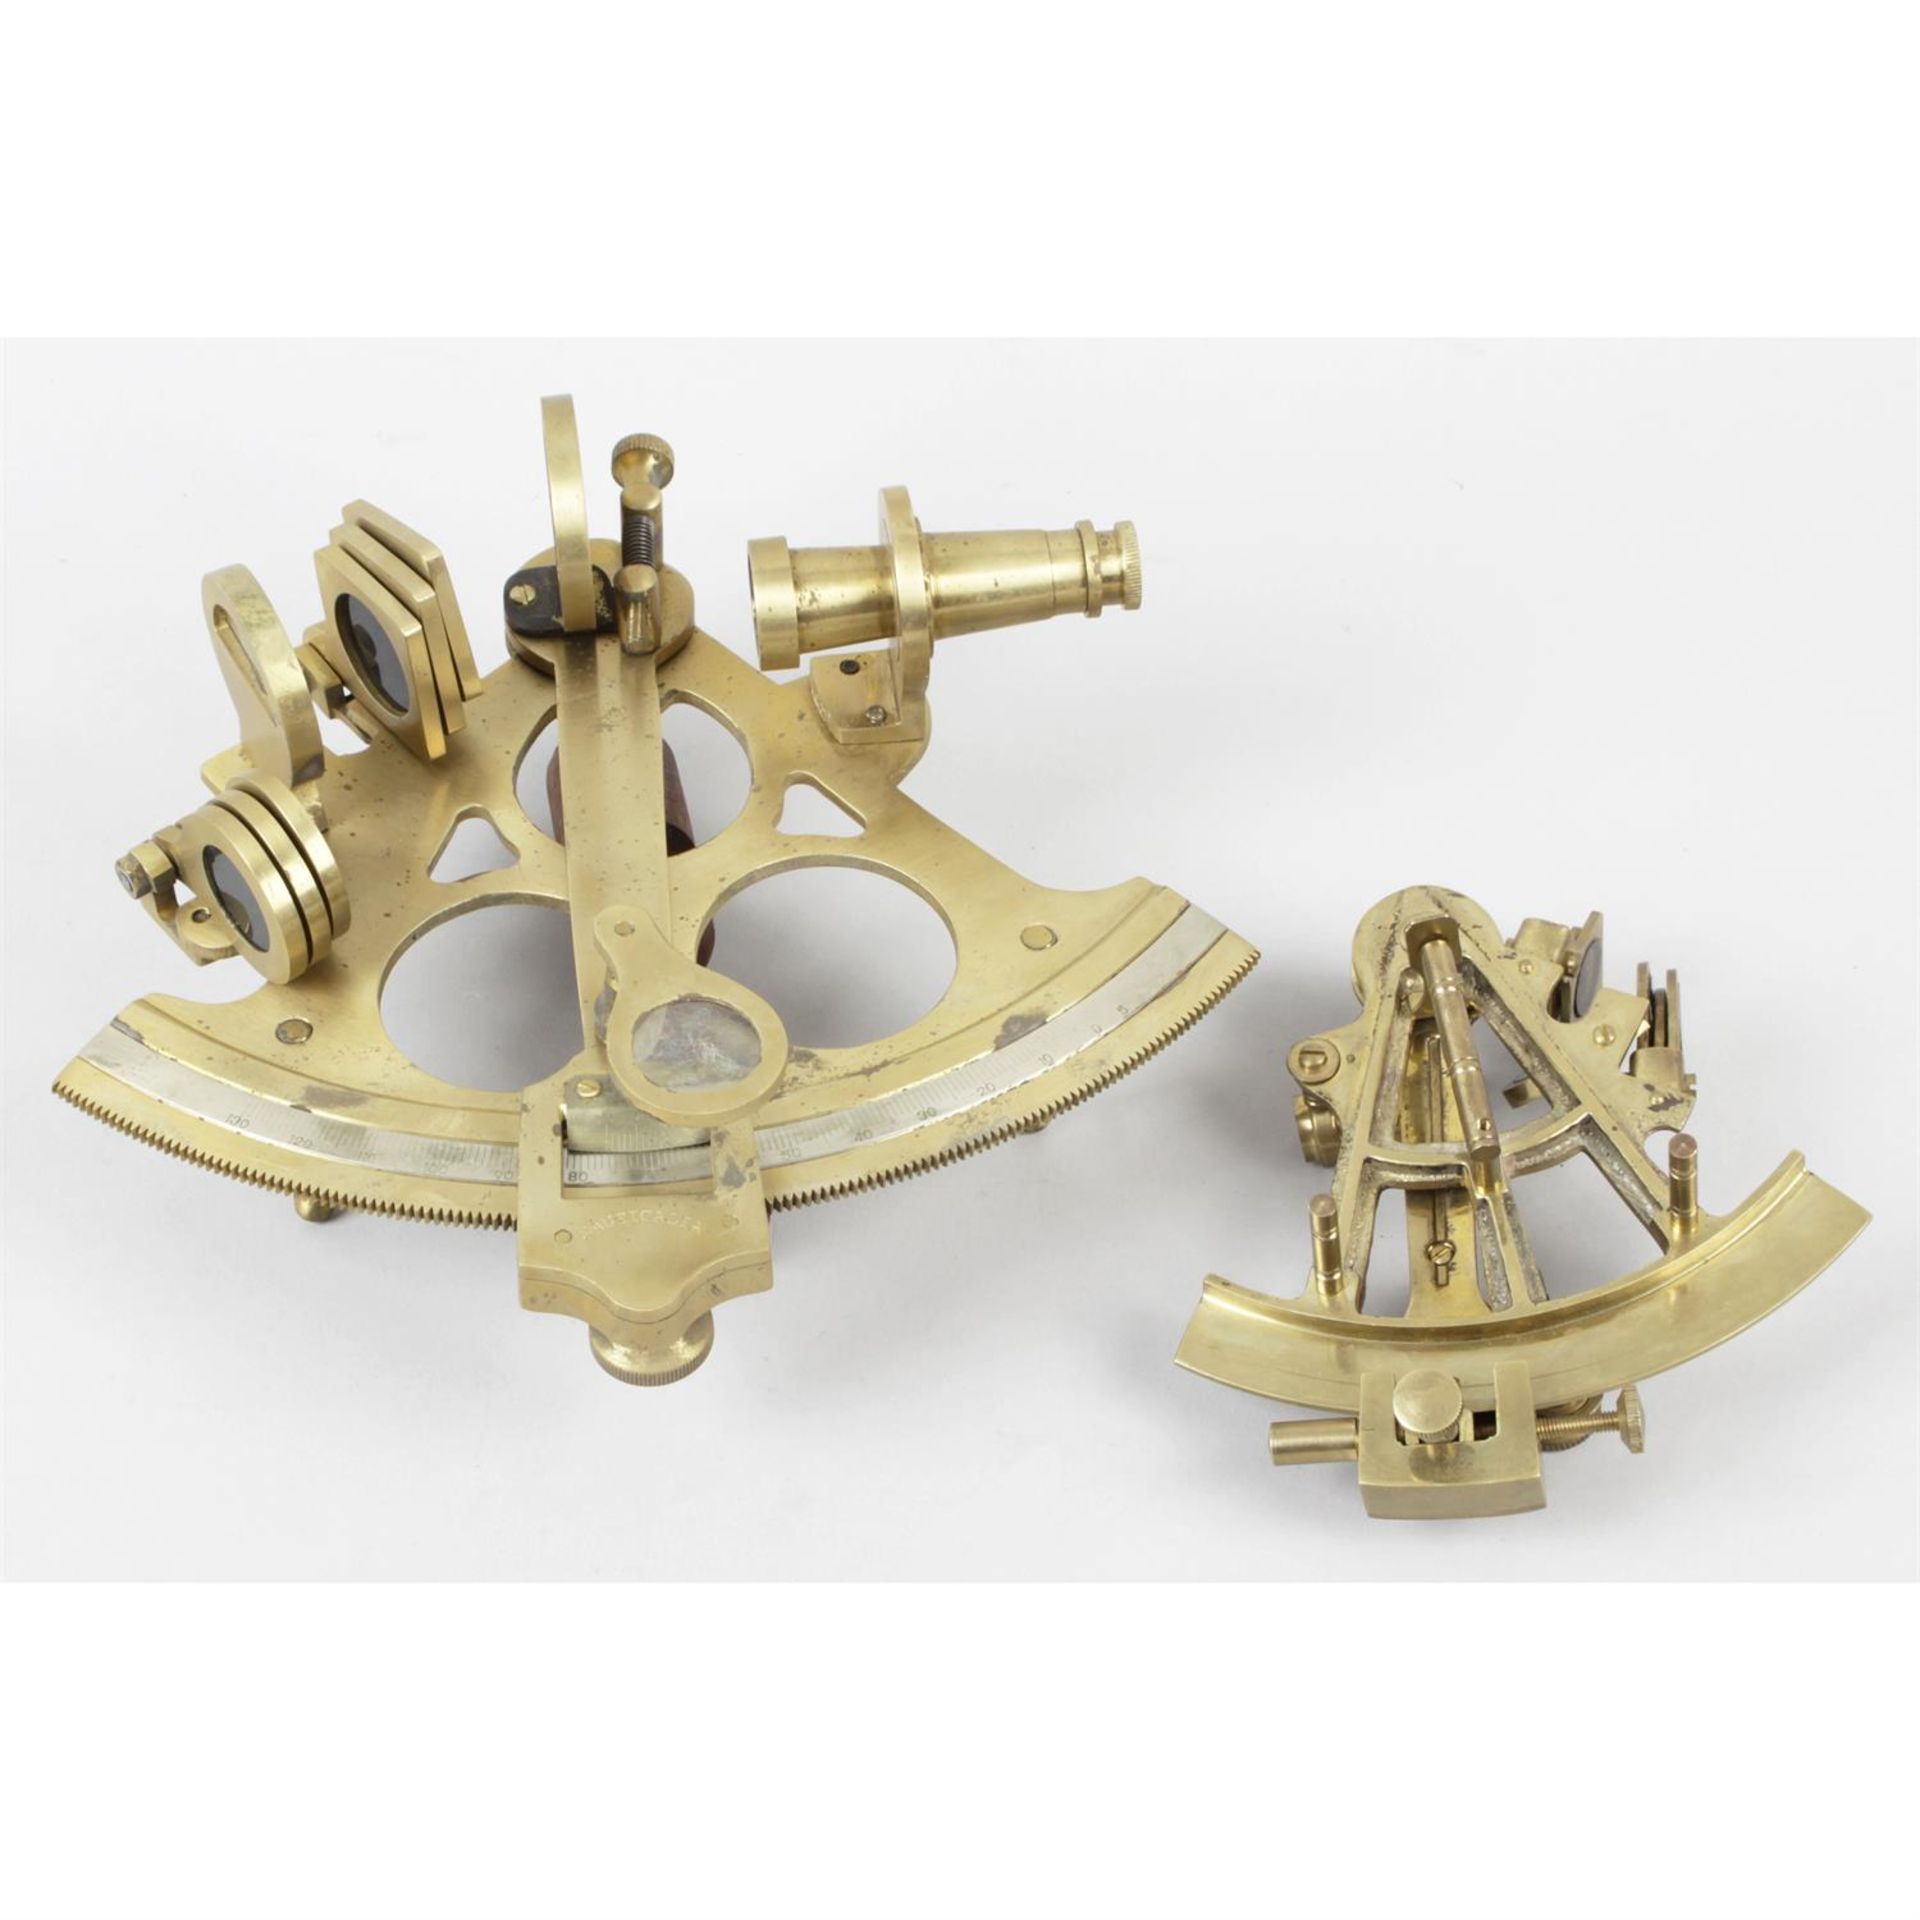 A H. Hughes & Sons Ltd London brass sextant, together with two other sextants. (3)